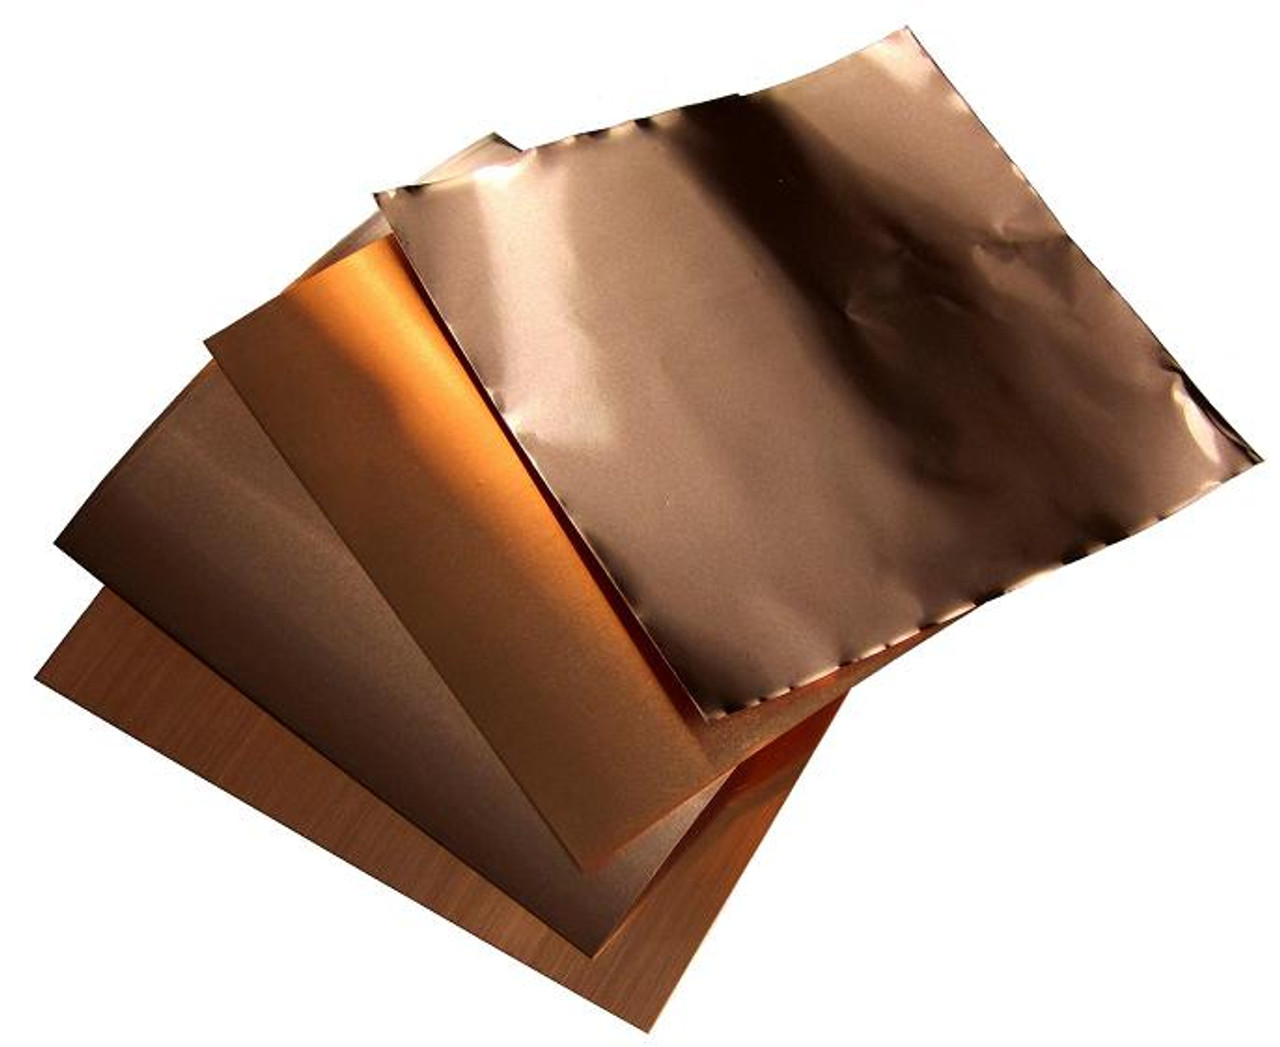 Copper Foil Sheet with Conductive Adhesive - 12 x12 Sheet : ID